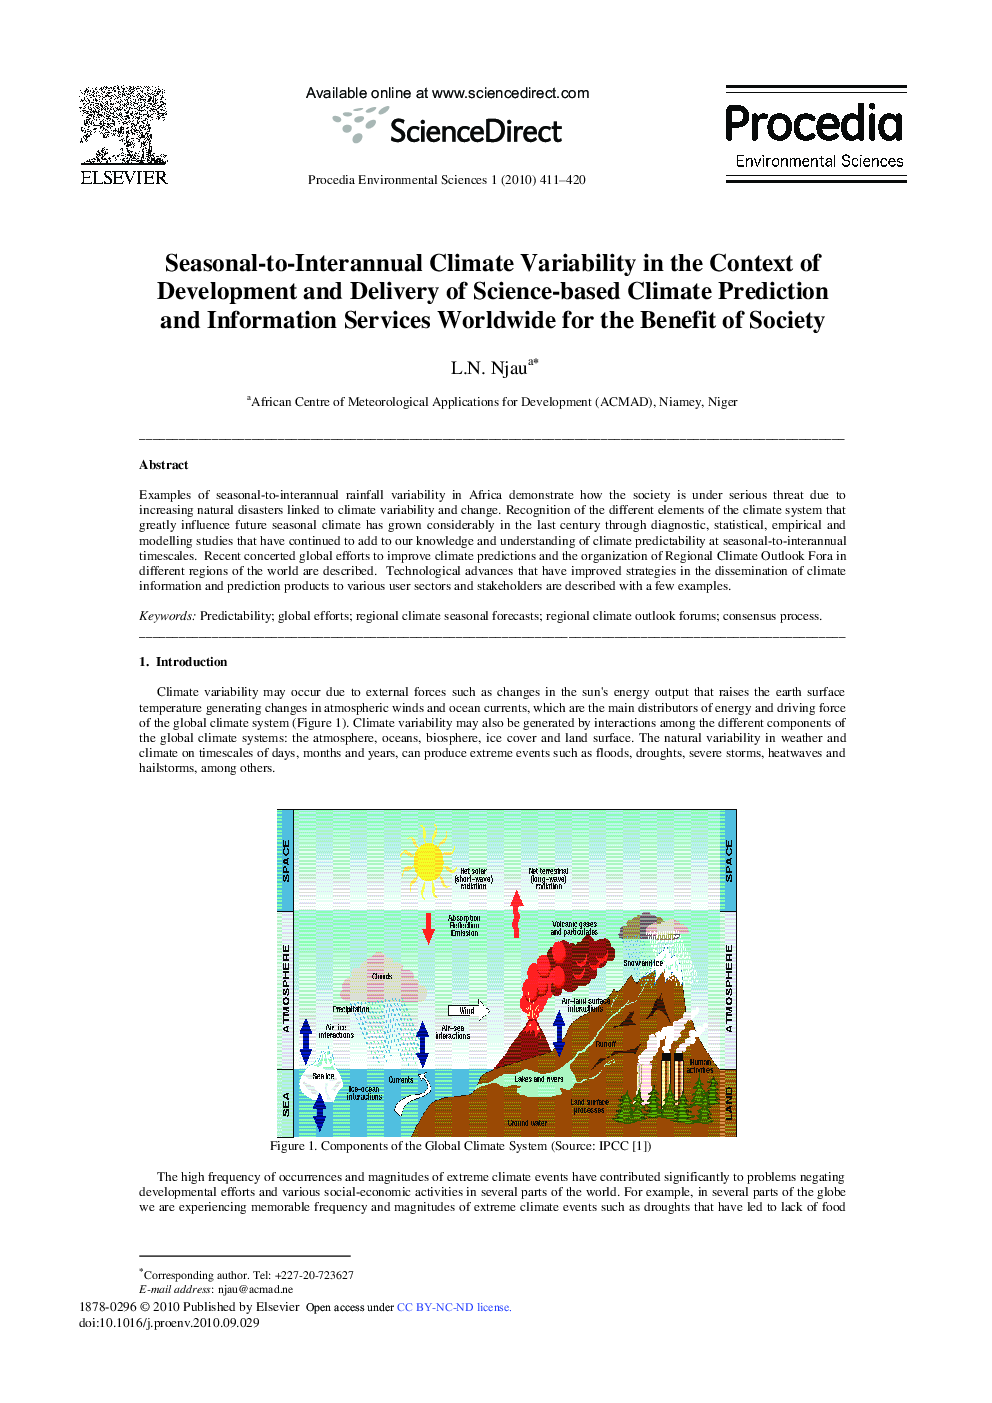 Seasonal-to-Interannual Climate Variability in the Context of Development and Delivery of Science-based Climate Prediction and Information Services Worldwide for the Benefit of Society